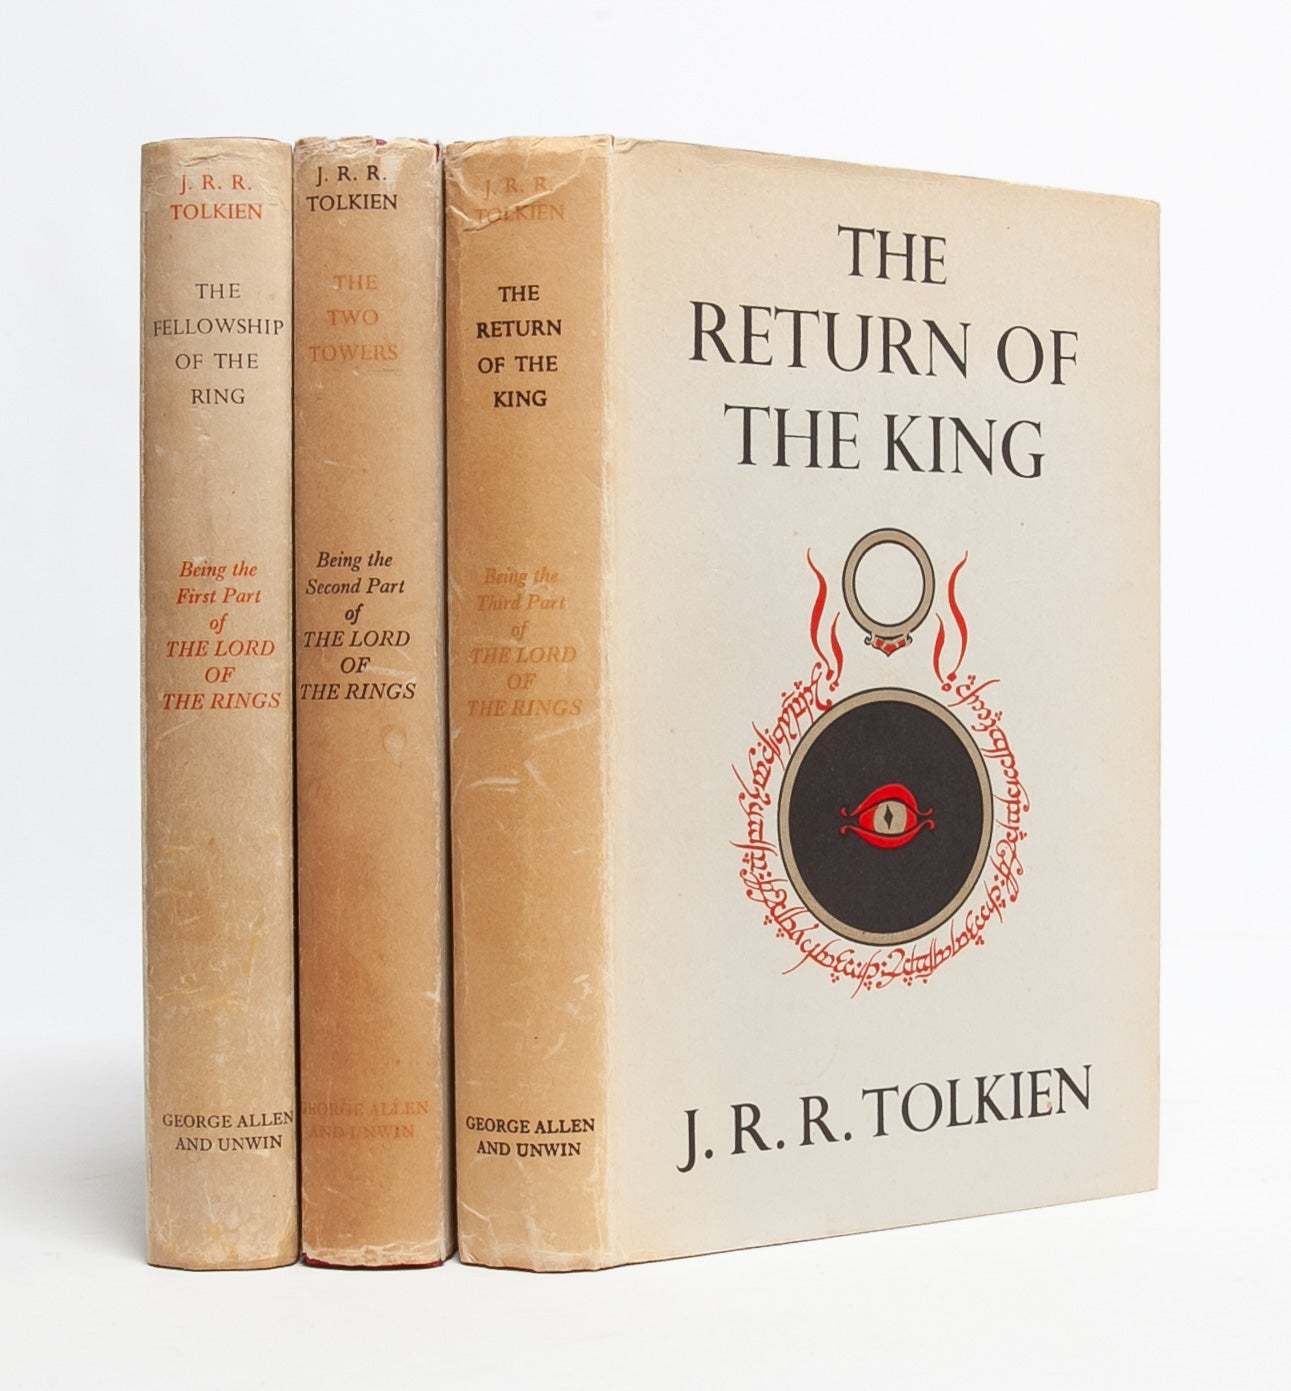 The Fellowship of the Ring by J. R. R. Tolkien